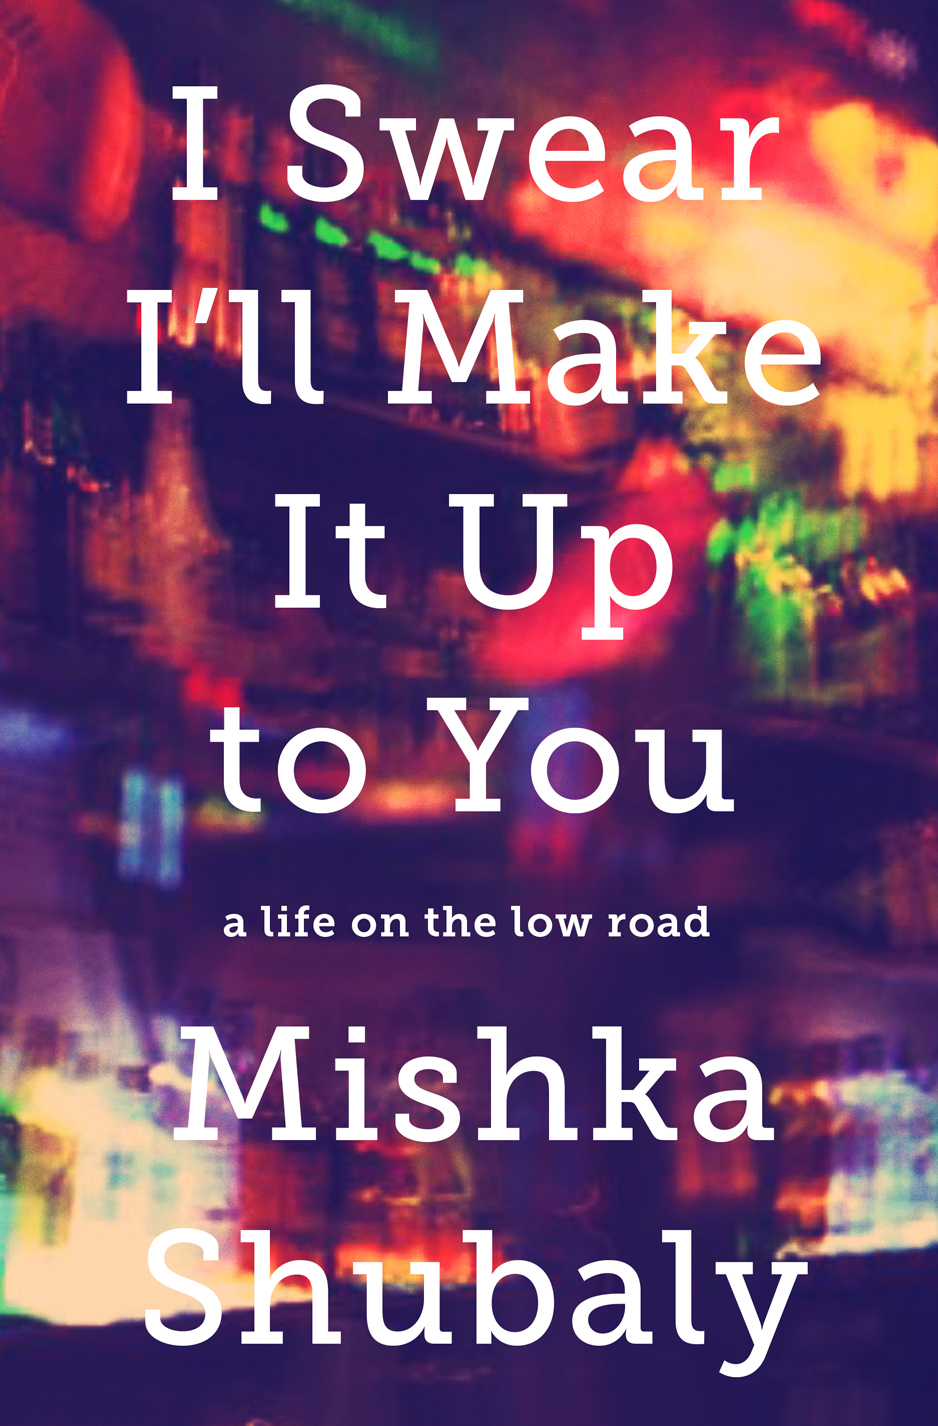 I Swear Ill Make It Up to You by Mishka Shubaly Hachette Book Group image